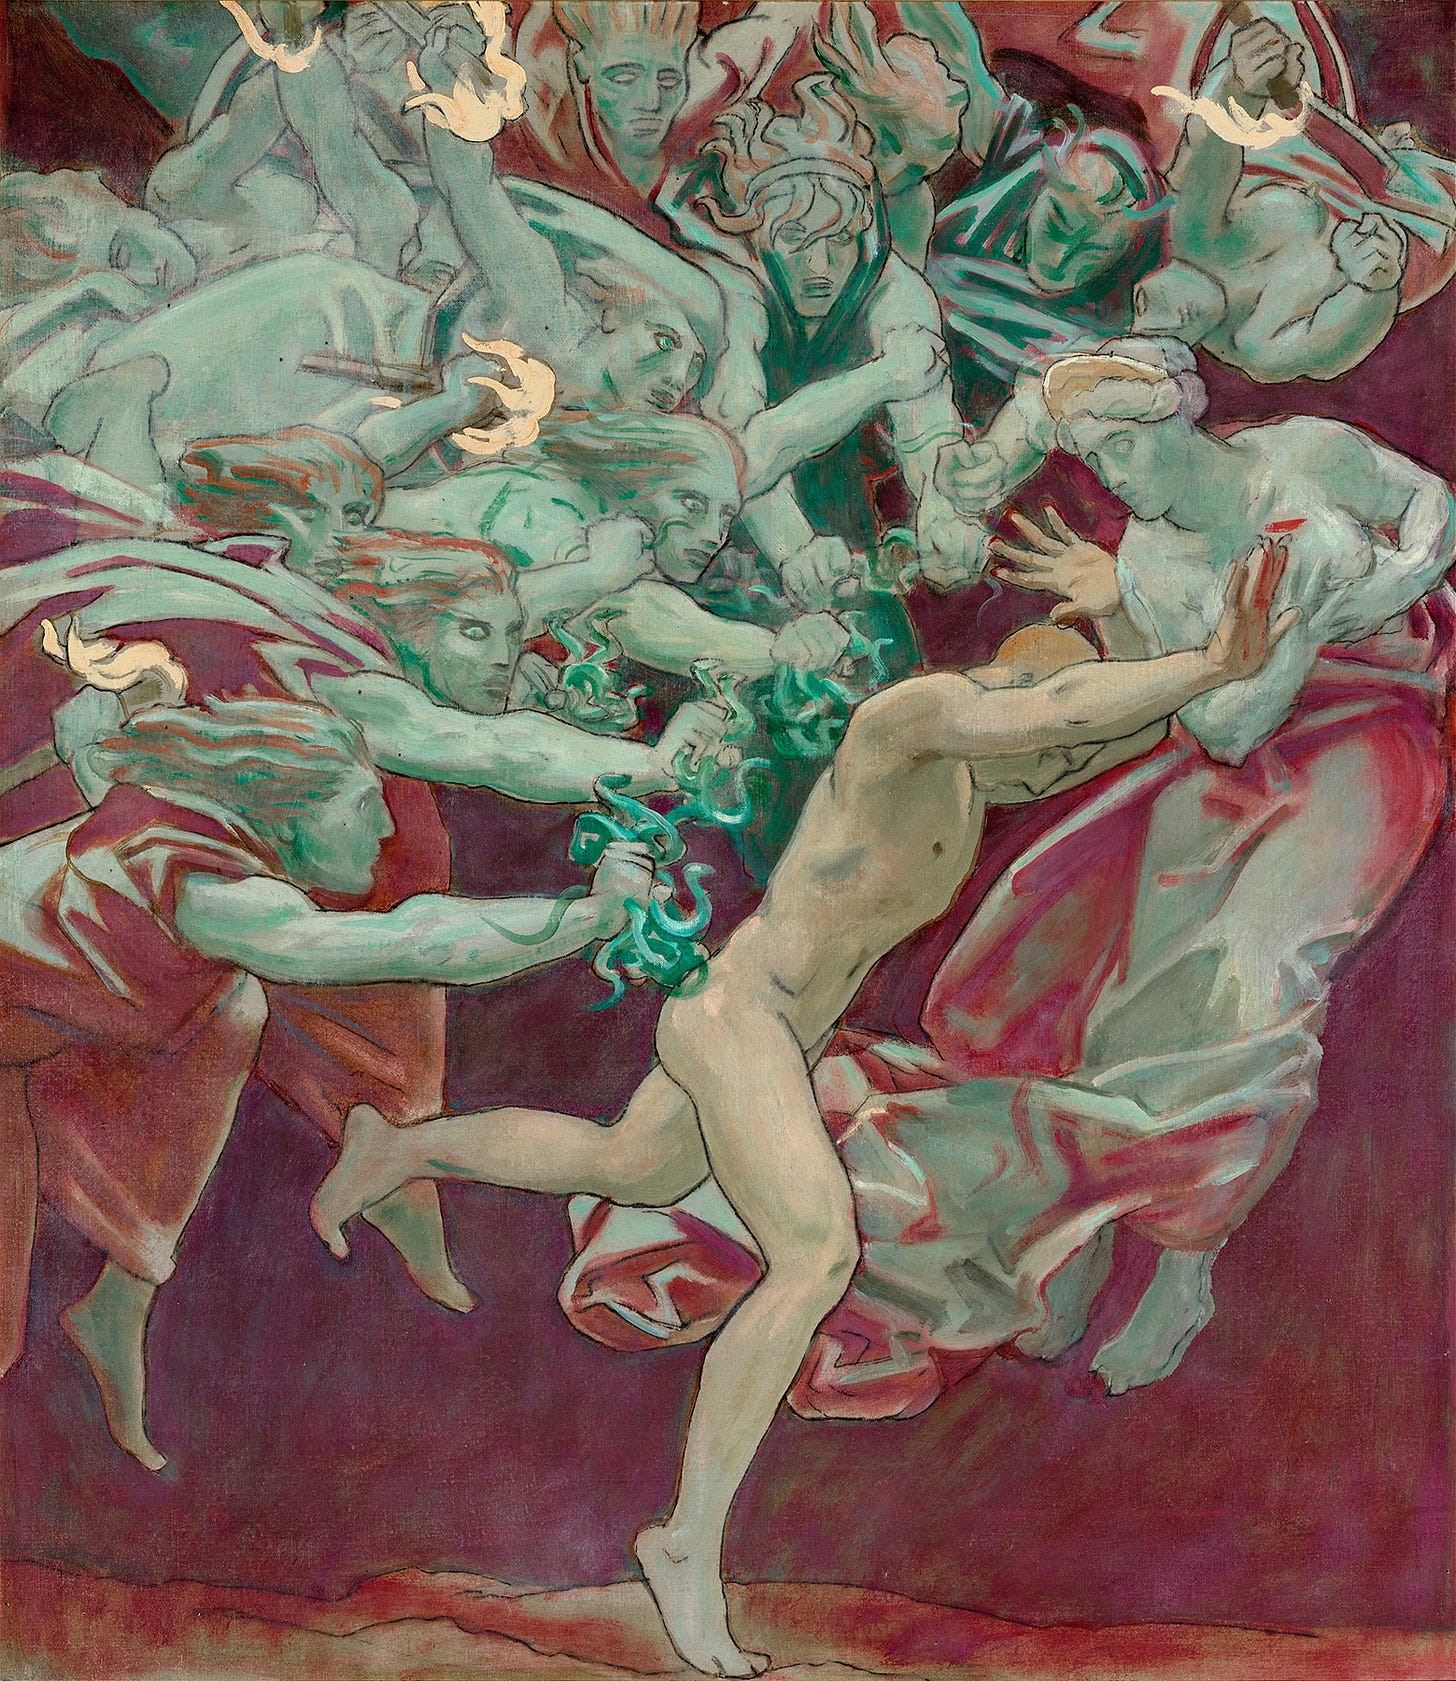 Orestes and The furies (Ca. 1920–21)